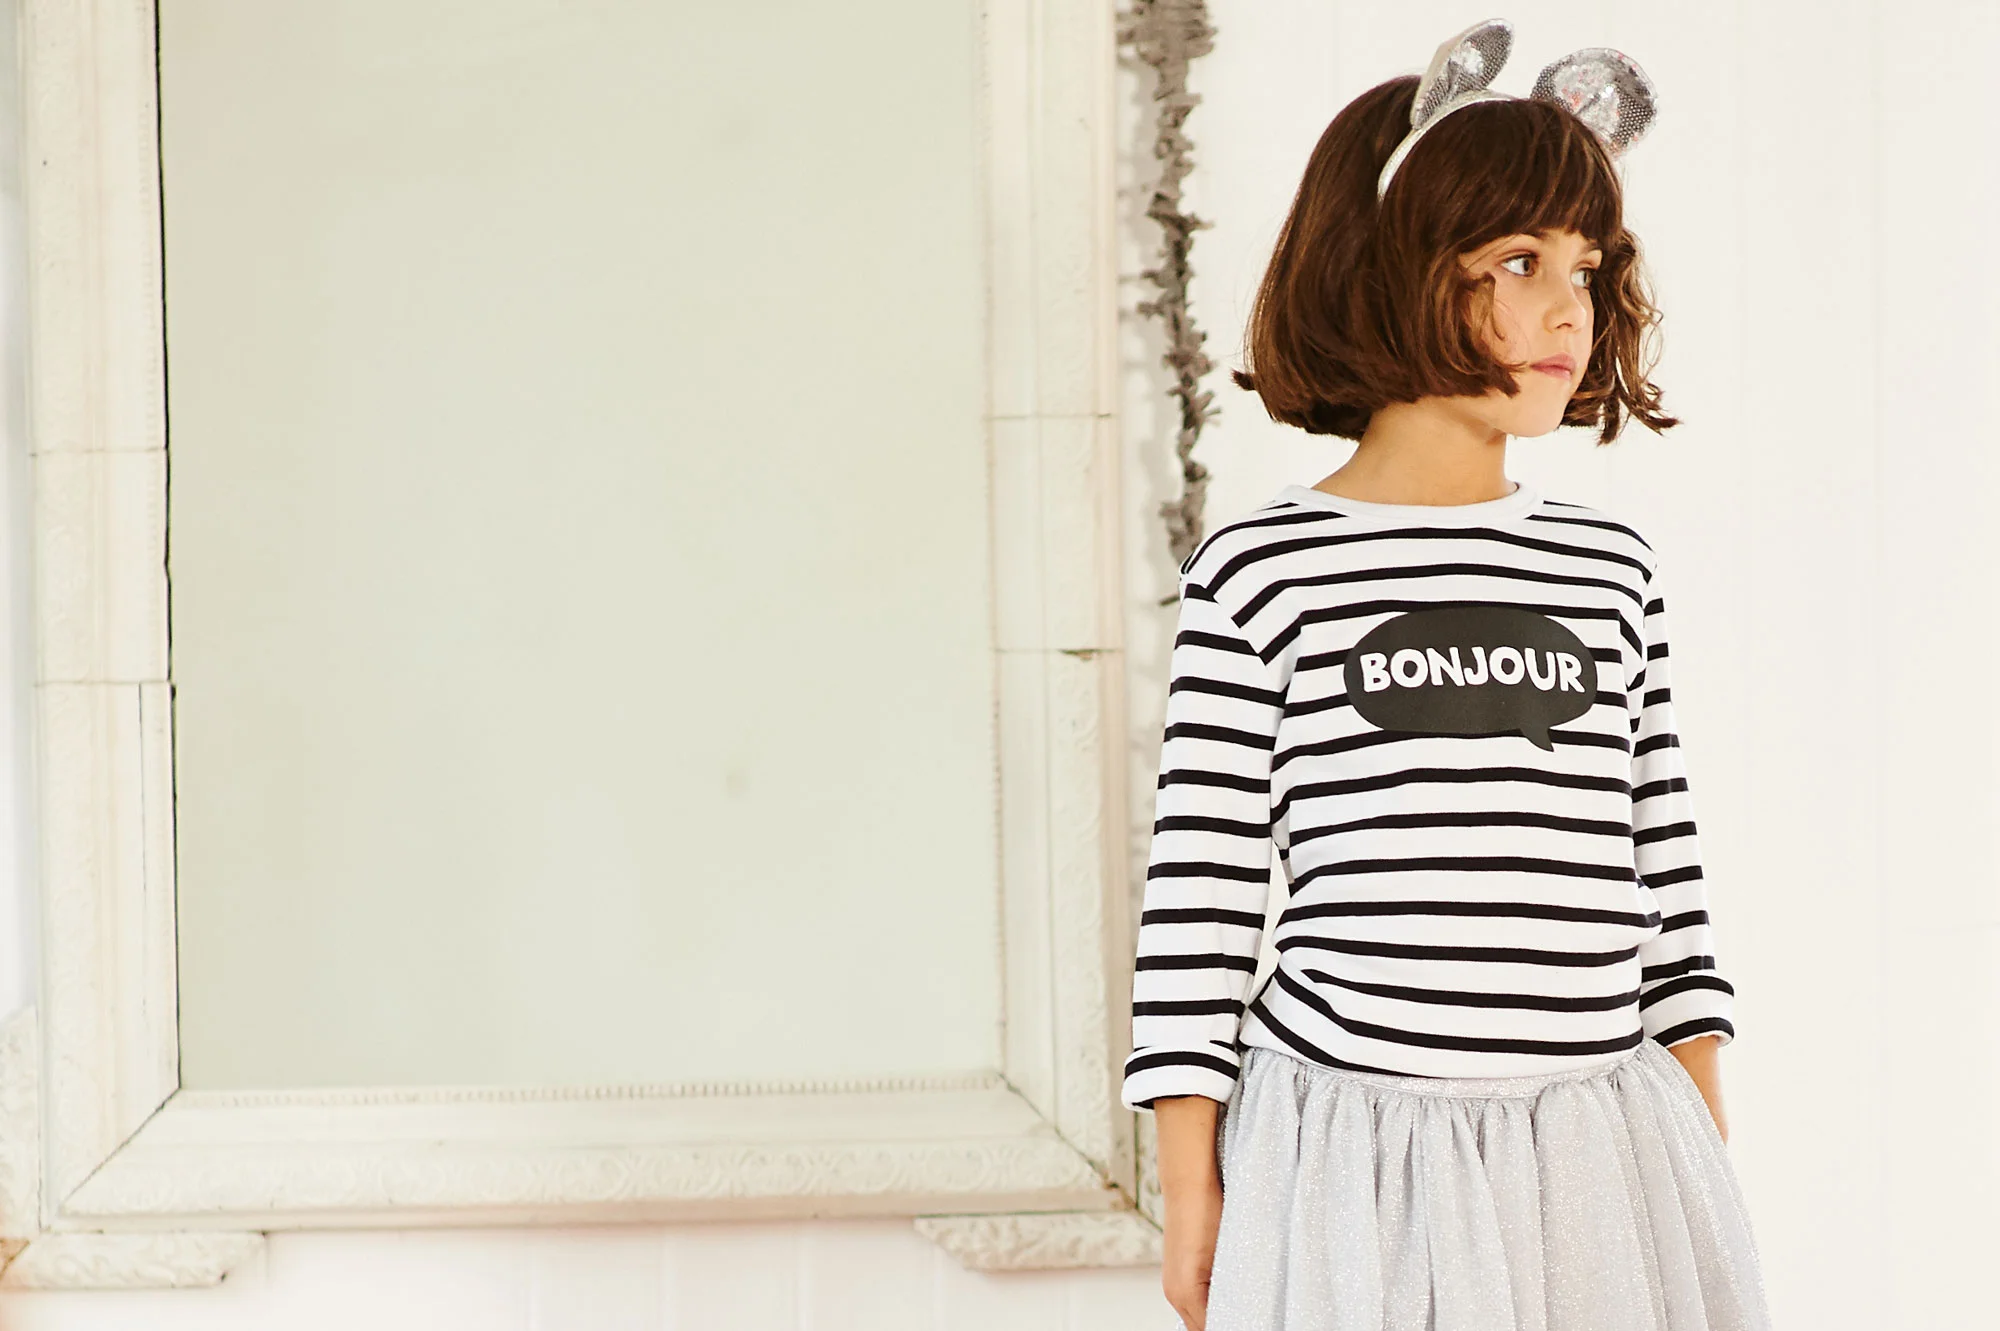 a girl wears a Bob & Blossom long-sleeved striped t-shirt with a Bonjour graphic designed by Petits Papiers